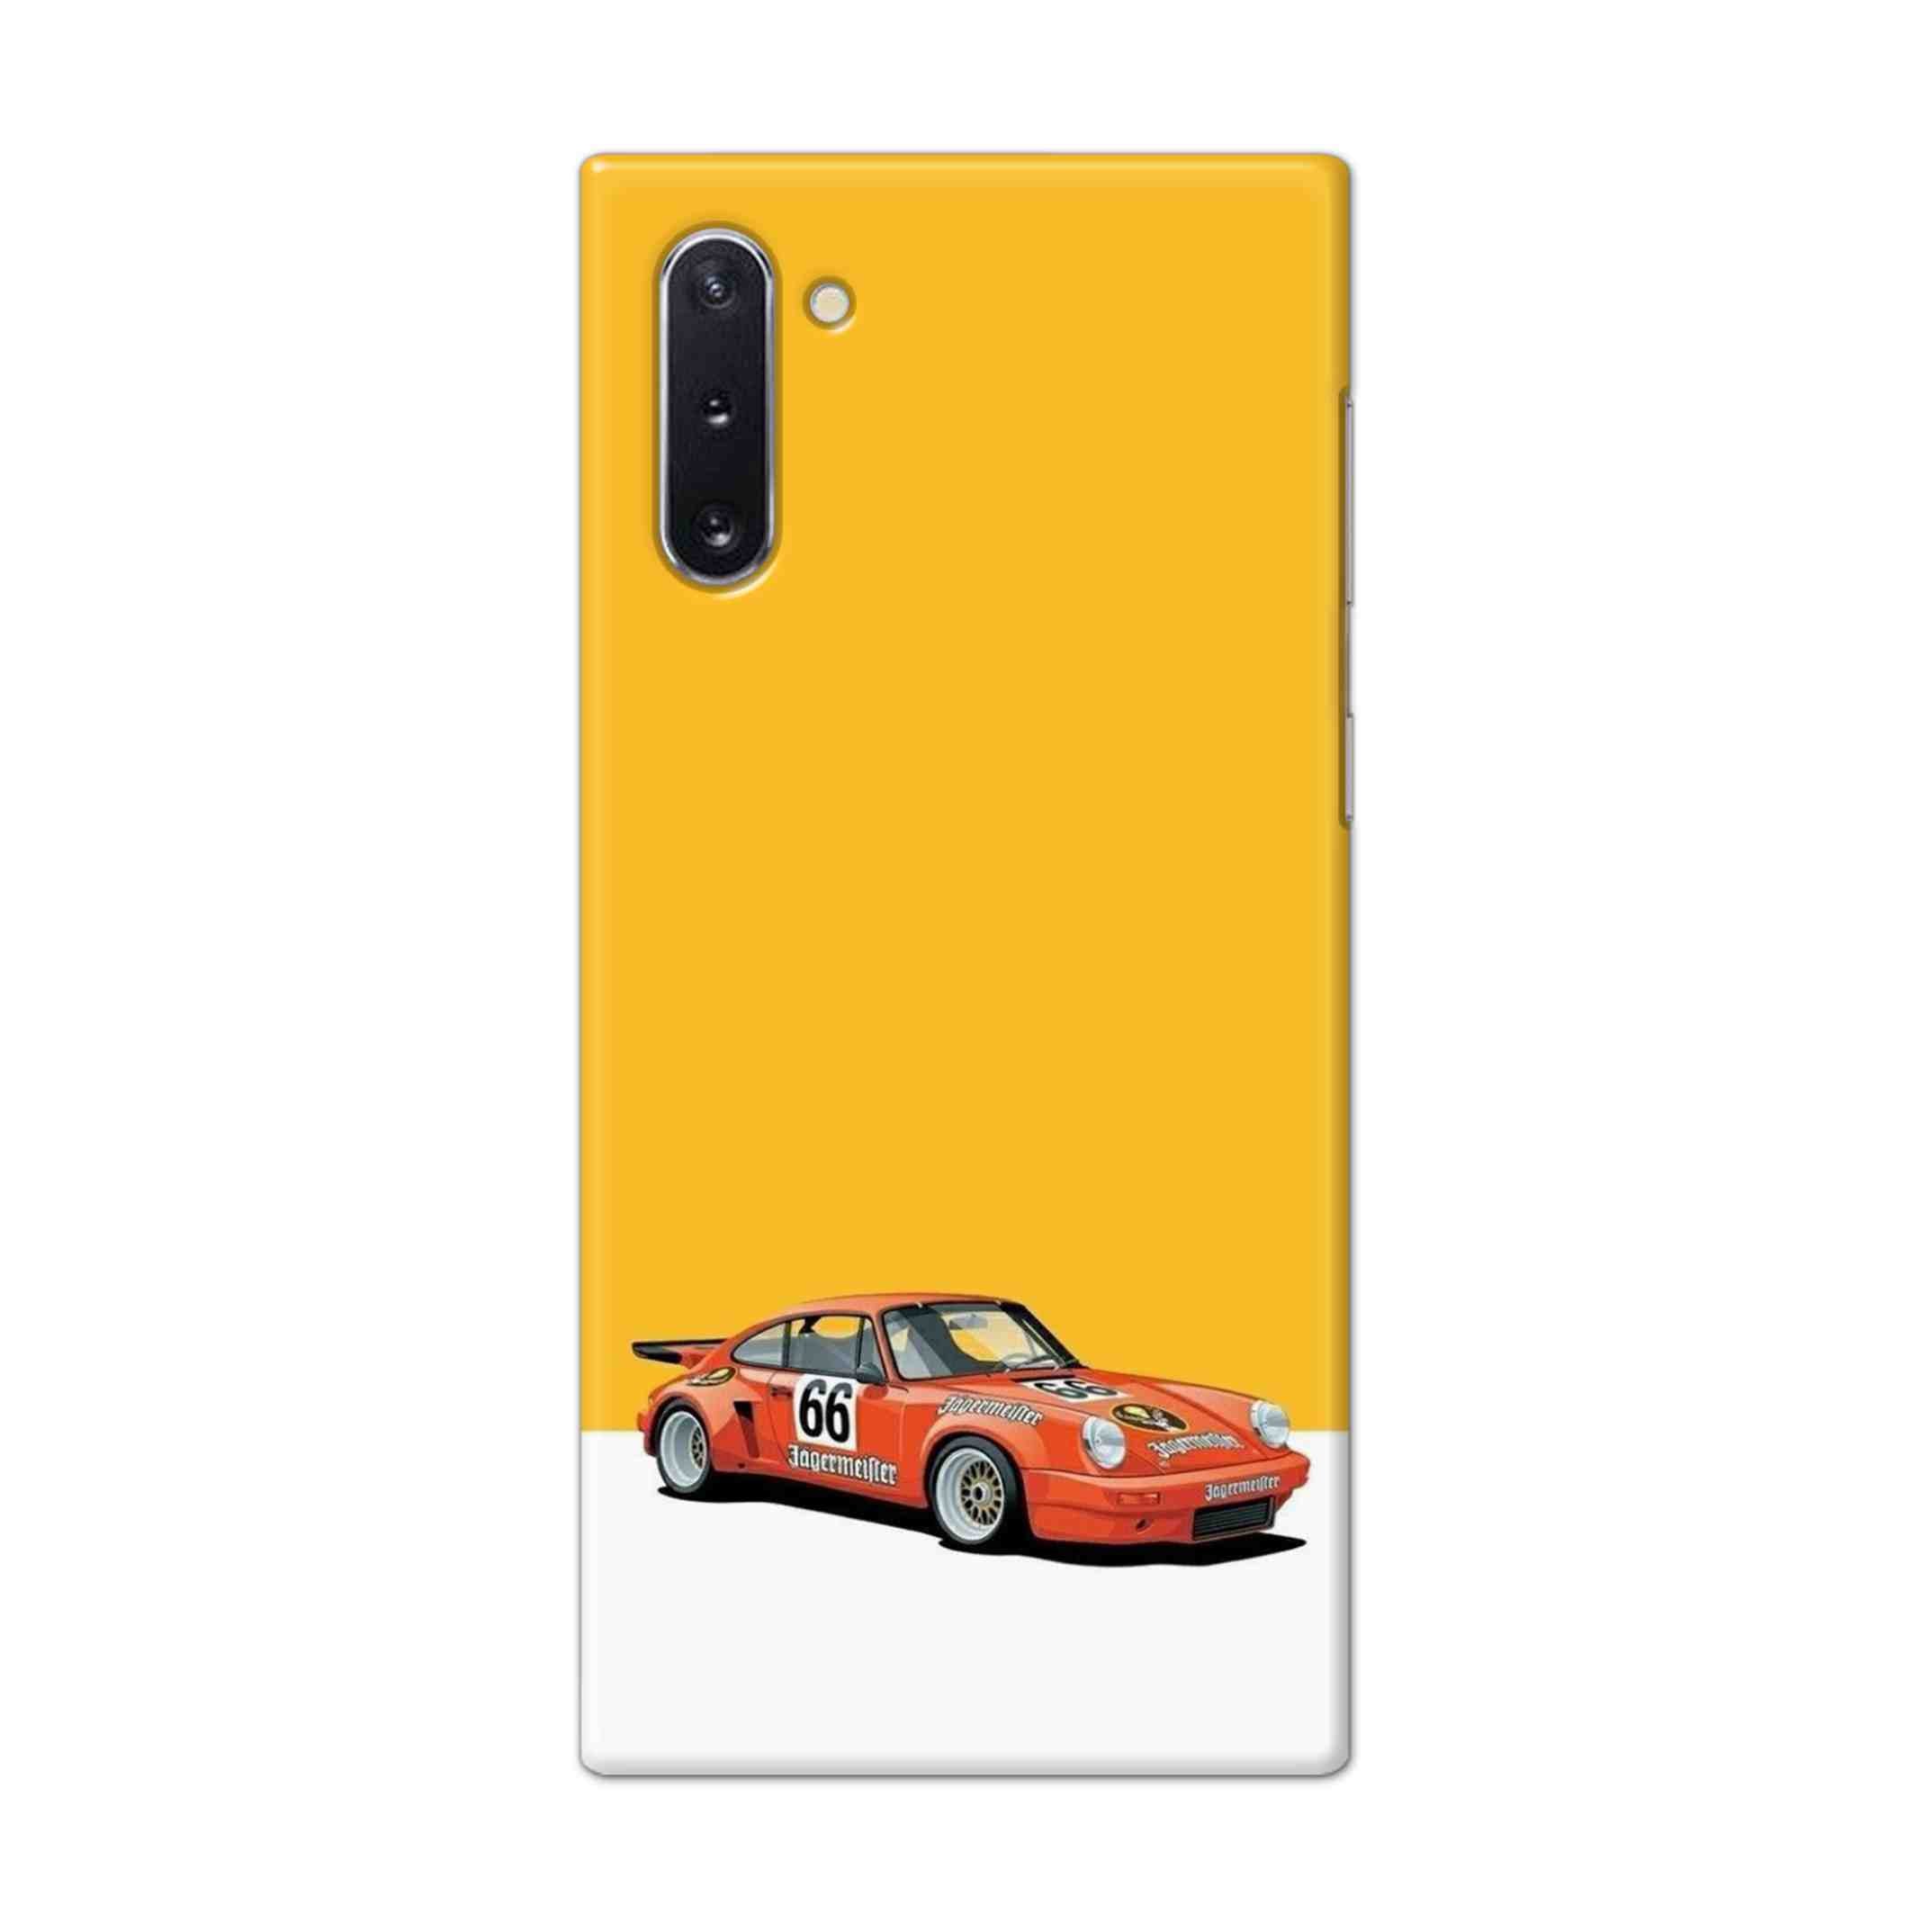 Buy Porche Hard Back Mobile Phone Case Cover For Samsung Galaxy Note 10 Online